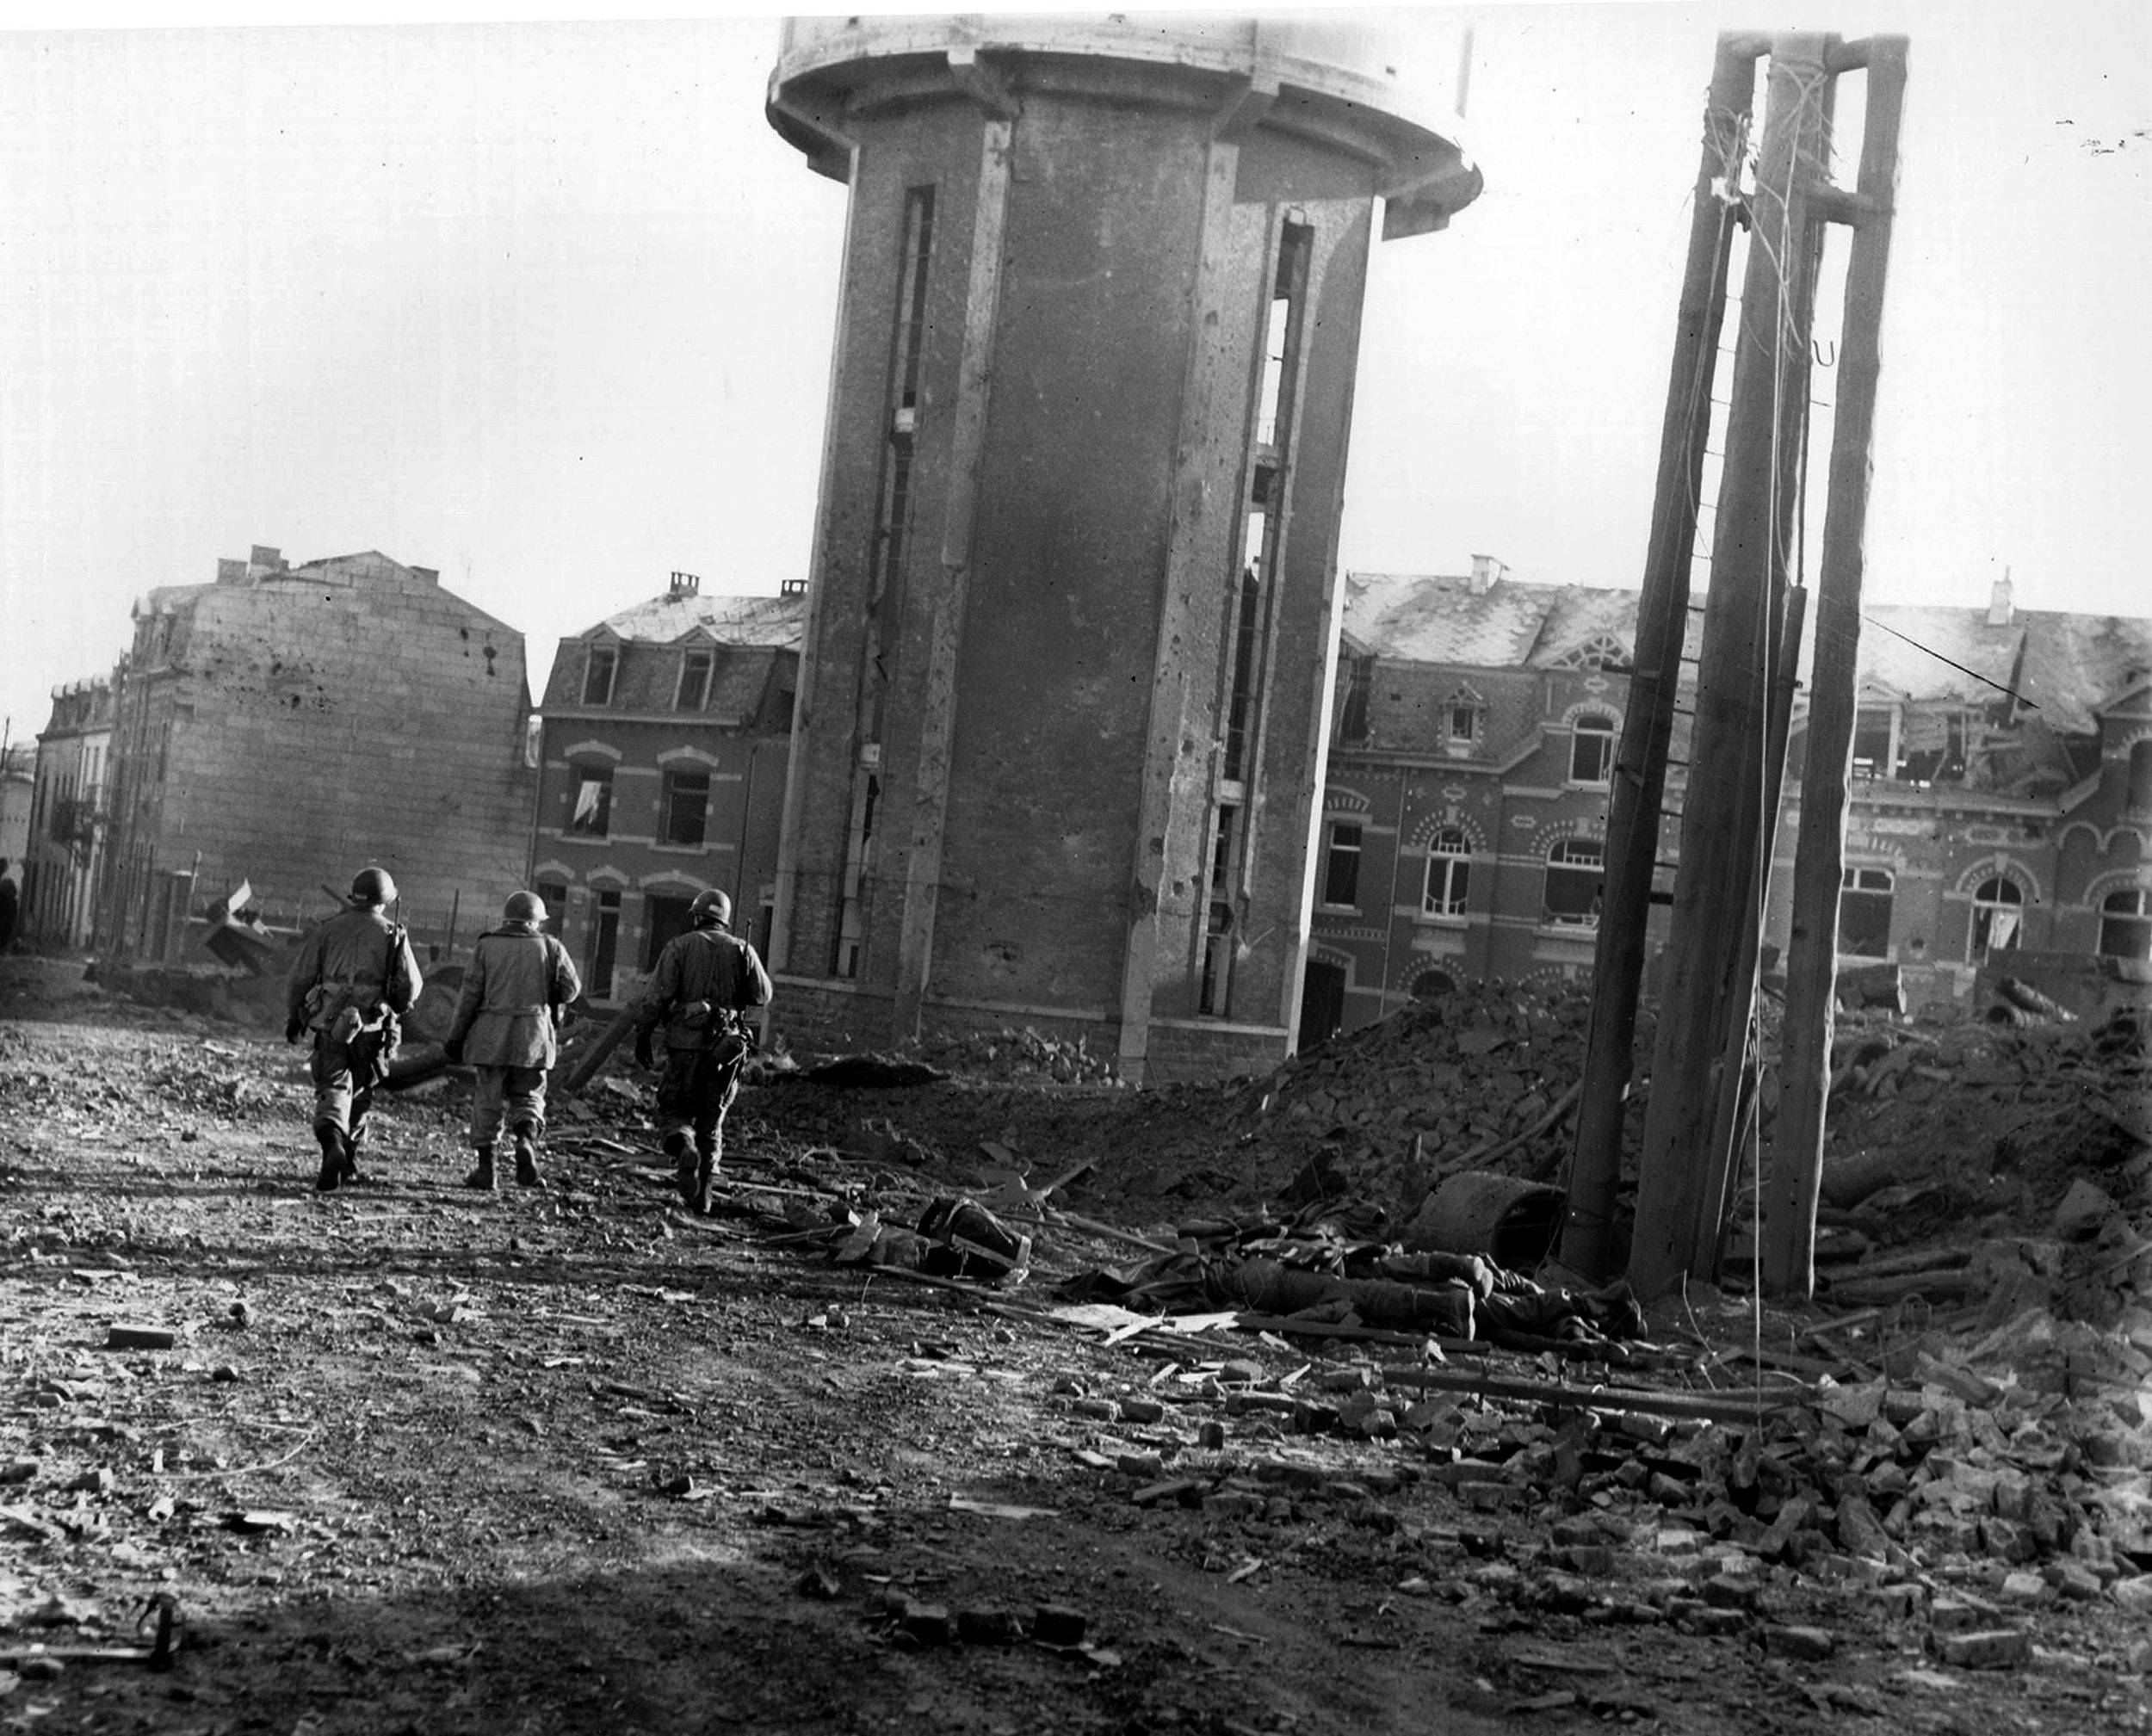 Their rifles slung over their shoulders, three men of the 101st Airborne Division walk down a rubble-strewn Bastogne street past the bodies of fellow soldiers killed by German bombing the previous night. This photograph was taken on Christmas Day, 1944, and the beleaguered defenders of the town were relieved the following day.